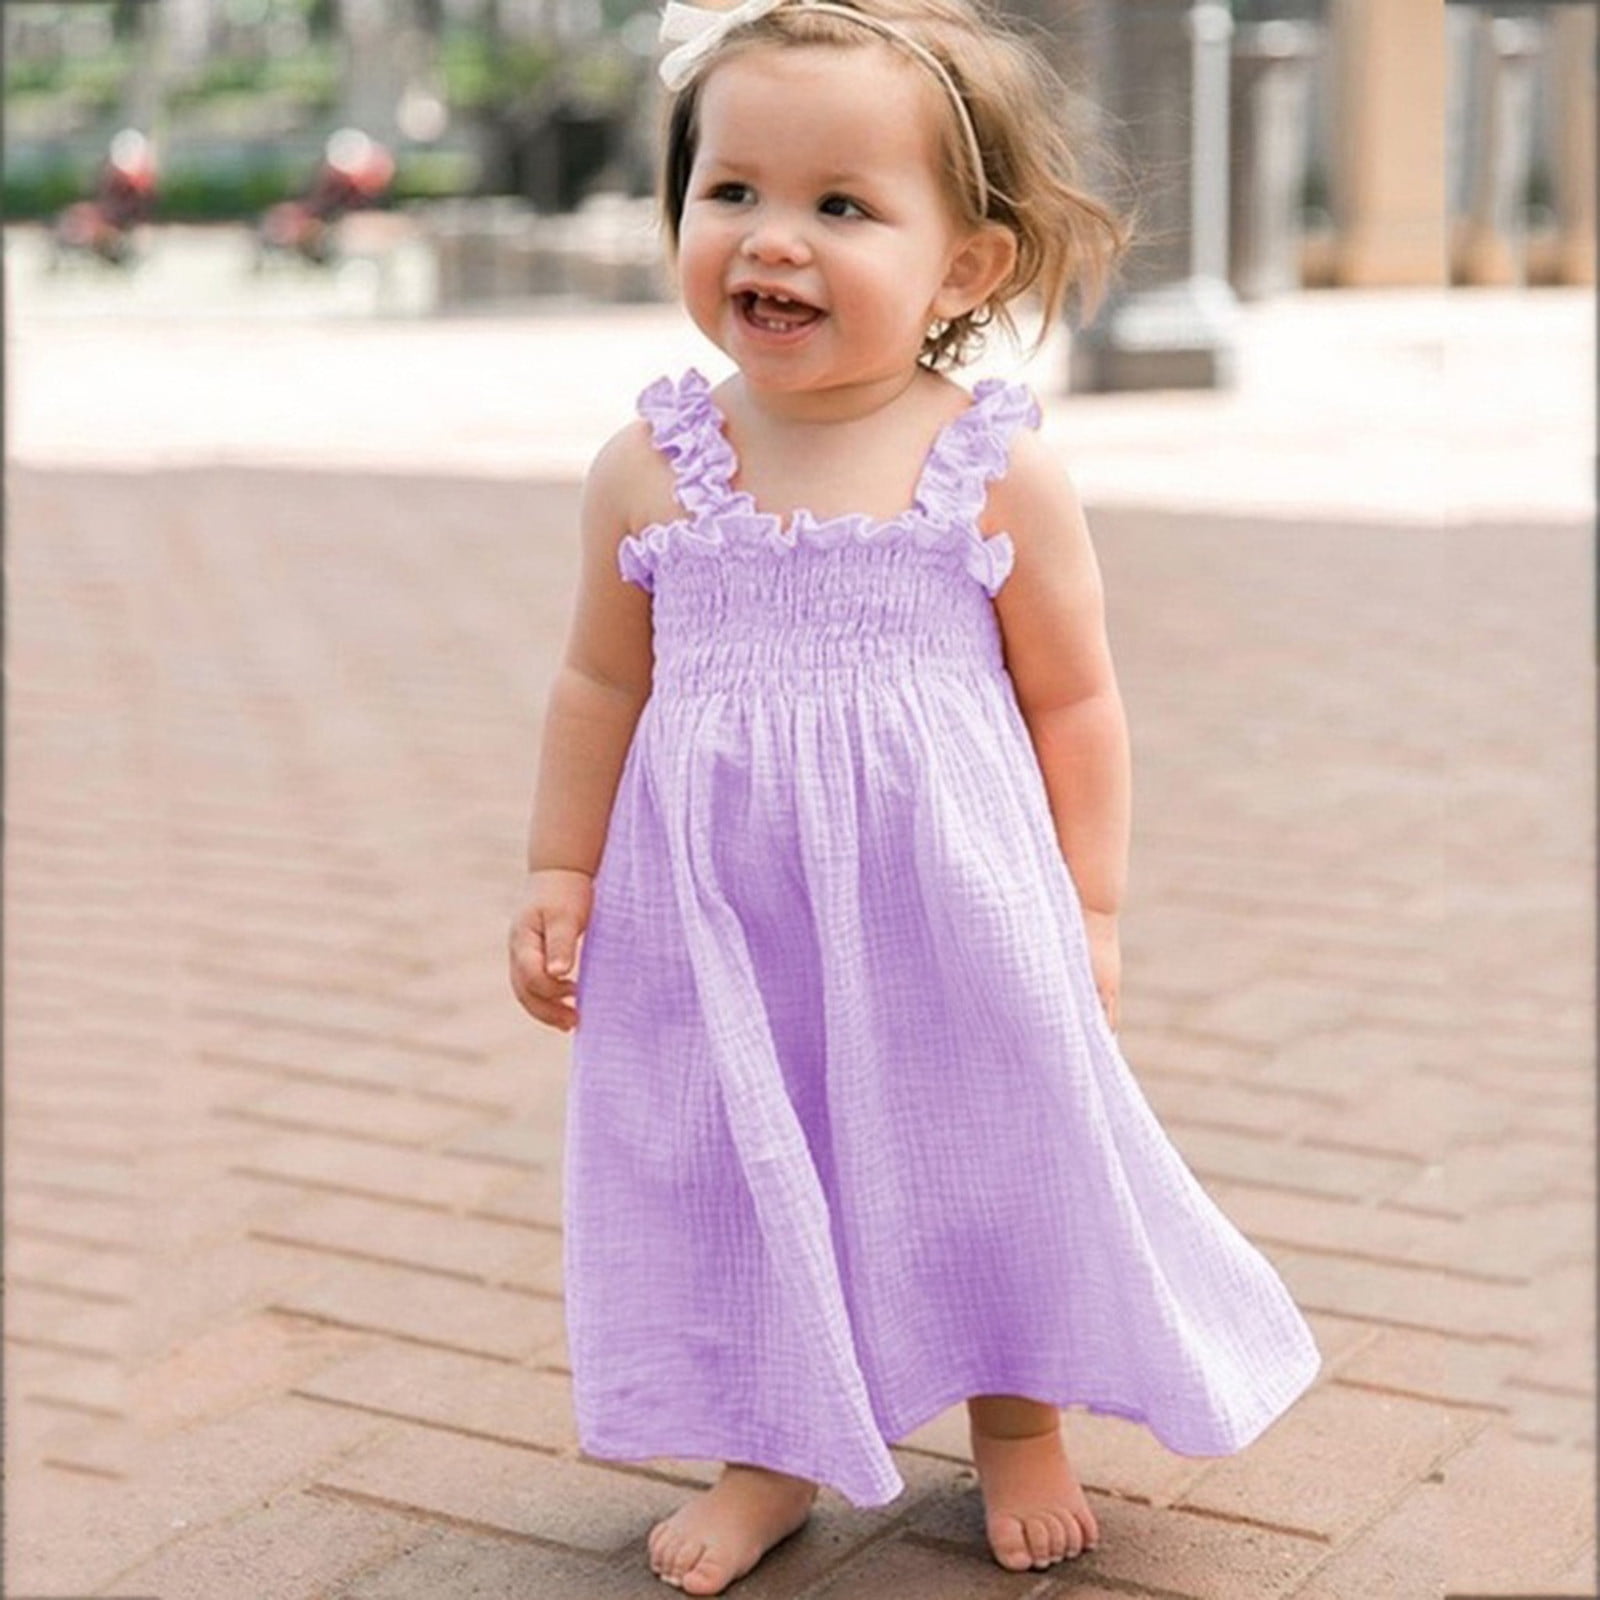 Kids Girl Clothes - Tops, Dresses & more - Purebaby - Purebaby